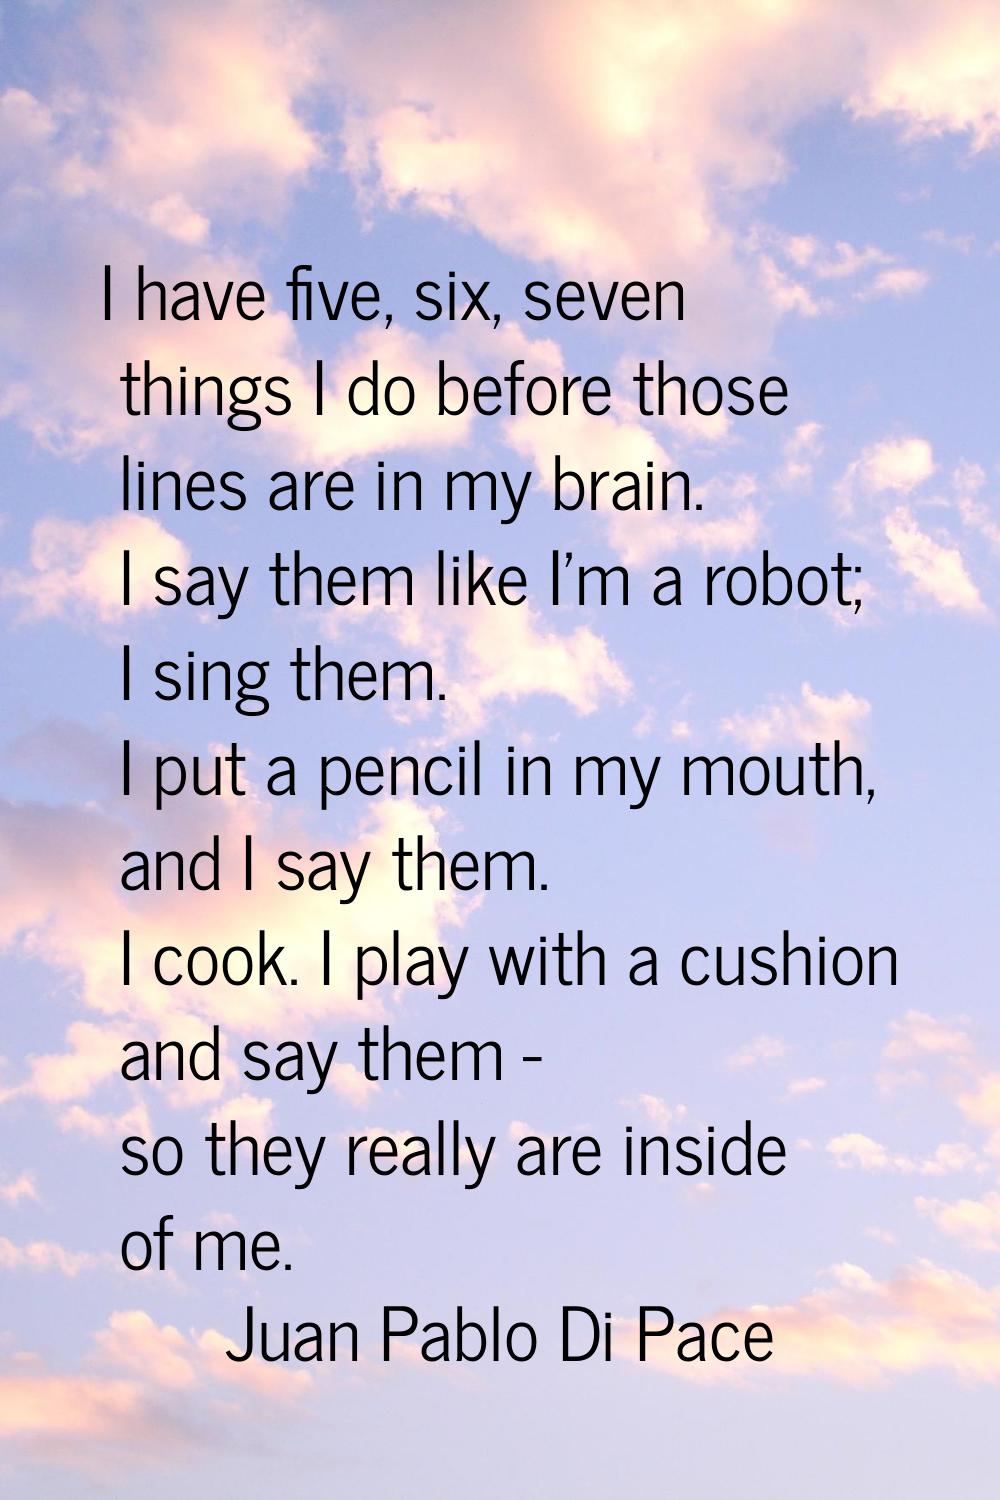 I have five, six, seven things I do before those lines are in my brain. I say them like I'm a robot